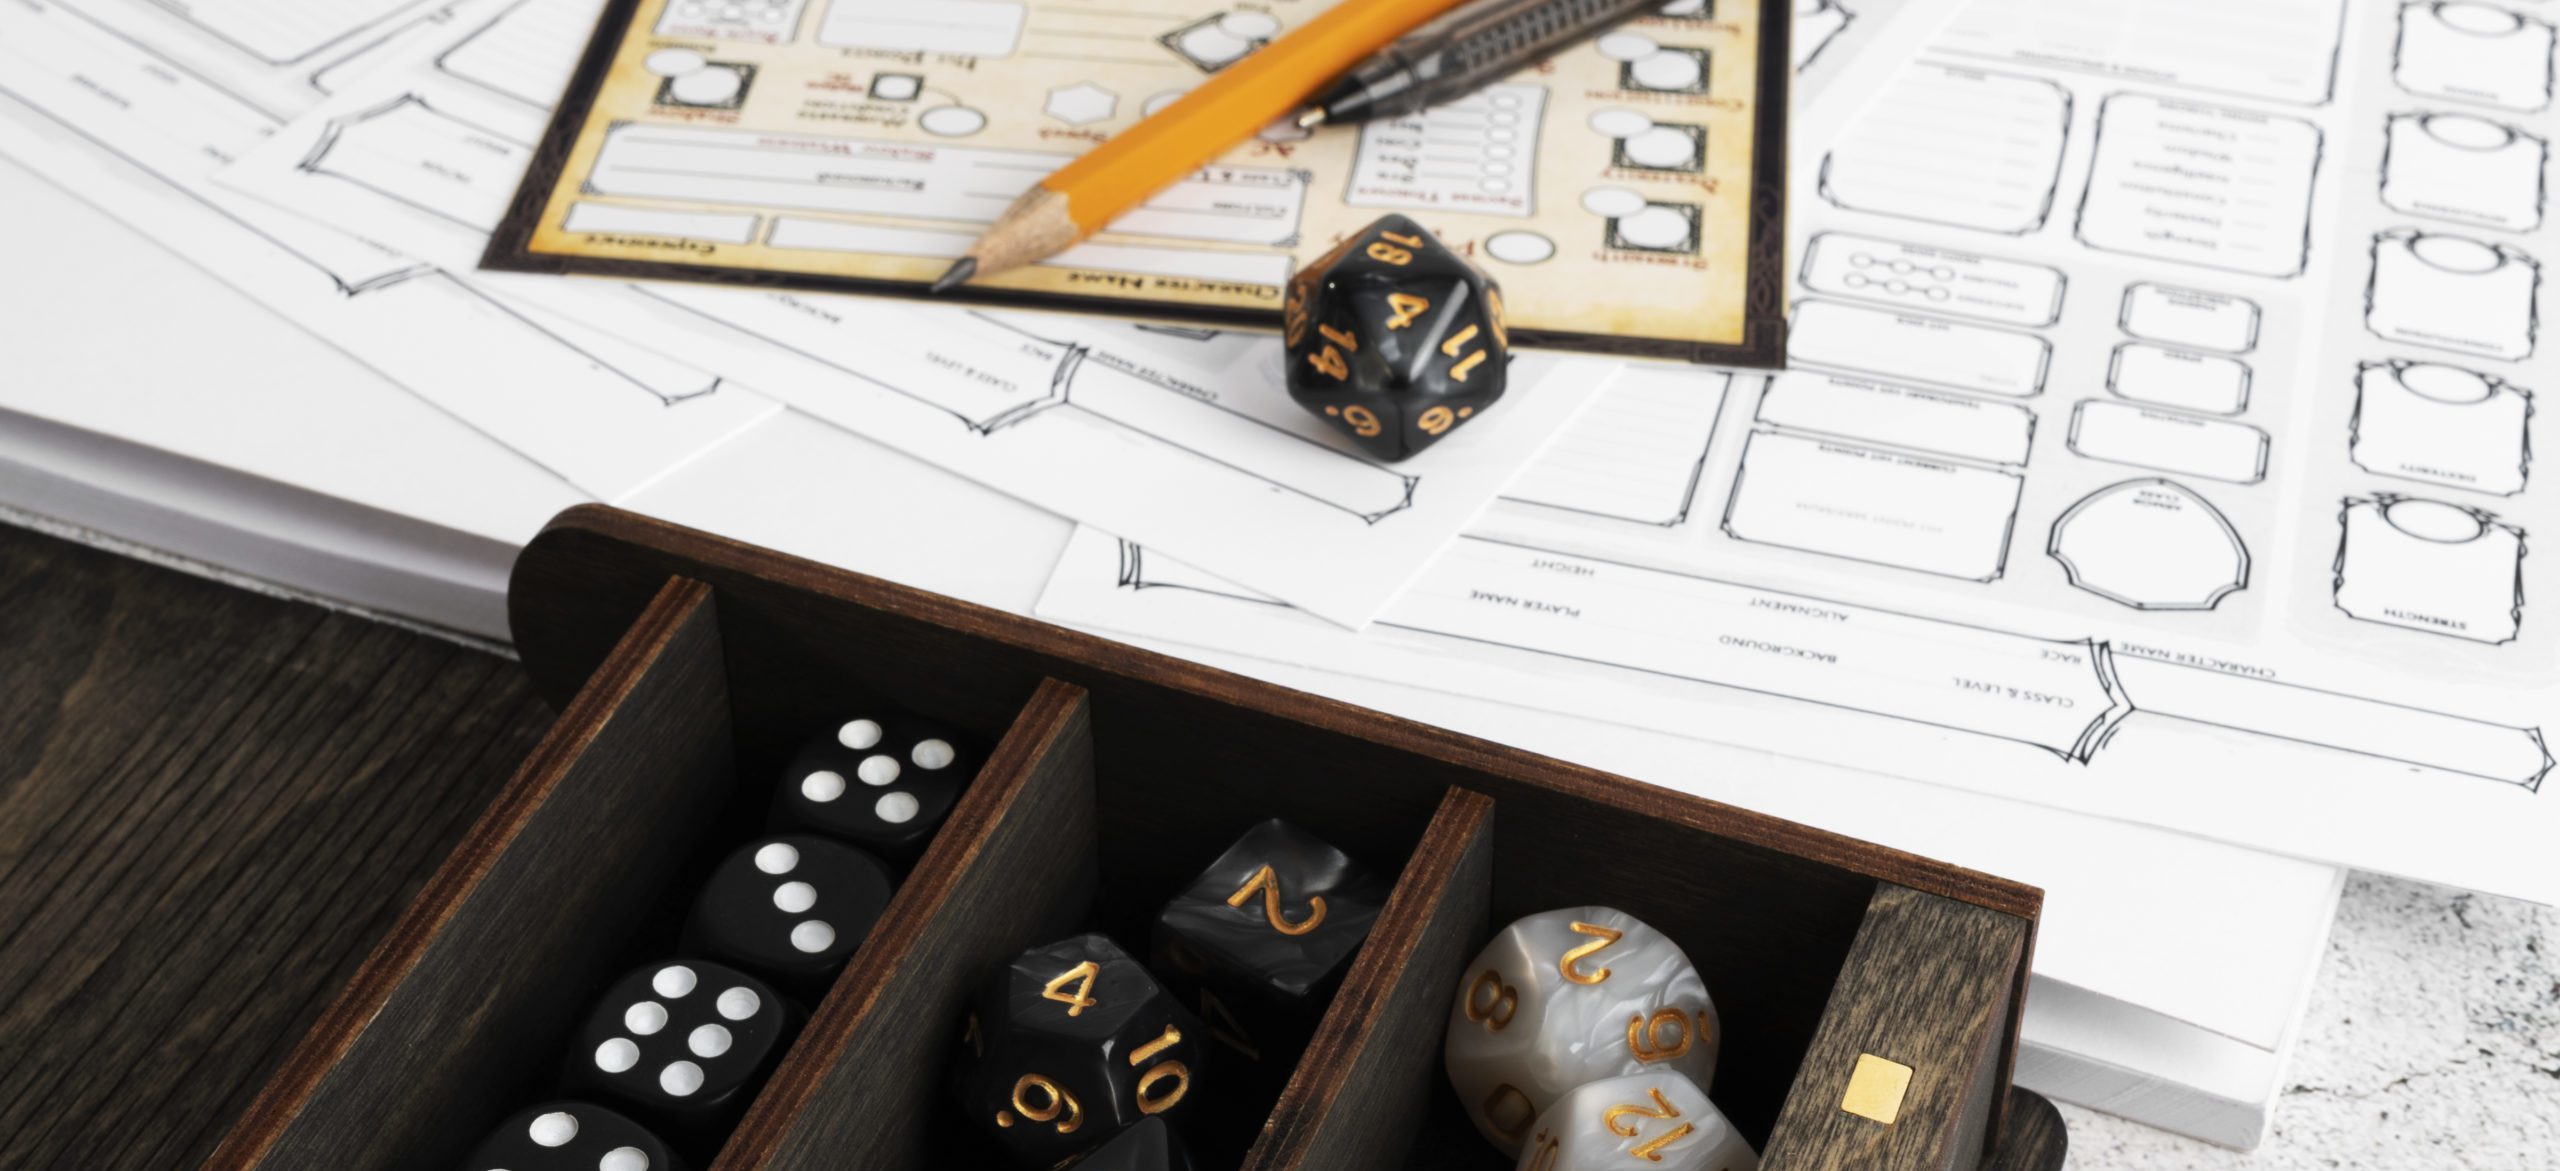 cover image of dice and dungeons and dragons character sheets for character creation guide by cult adventures